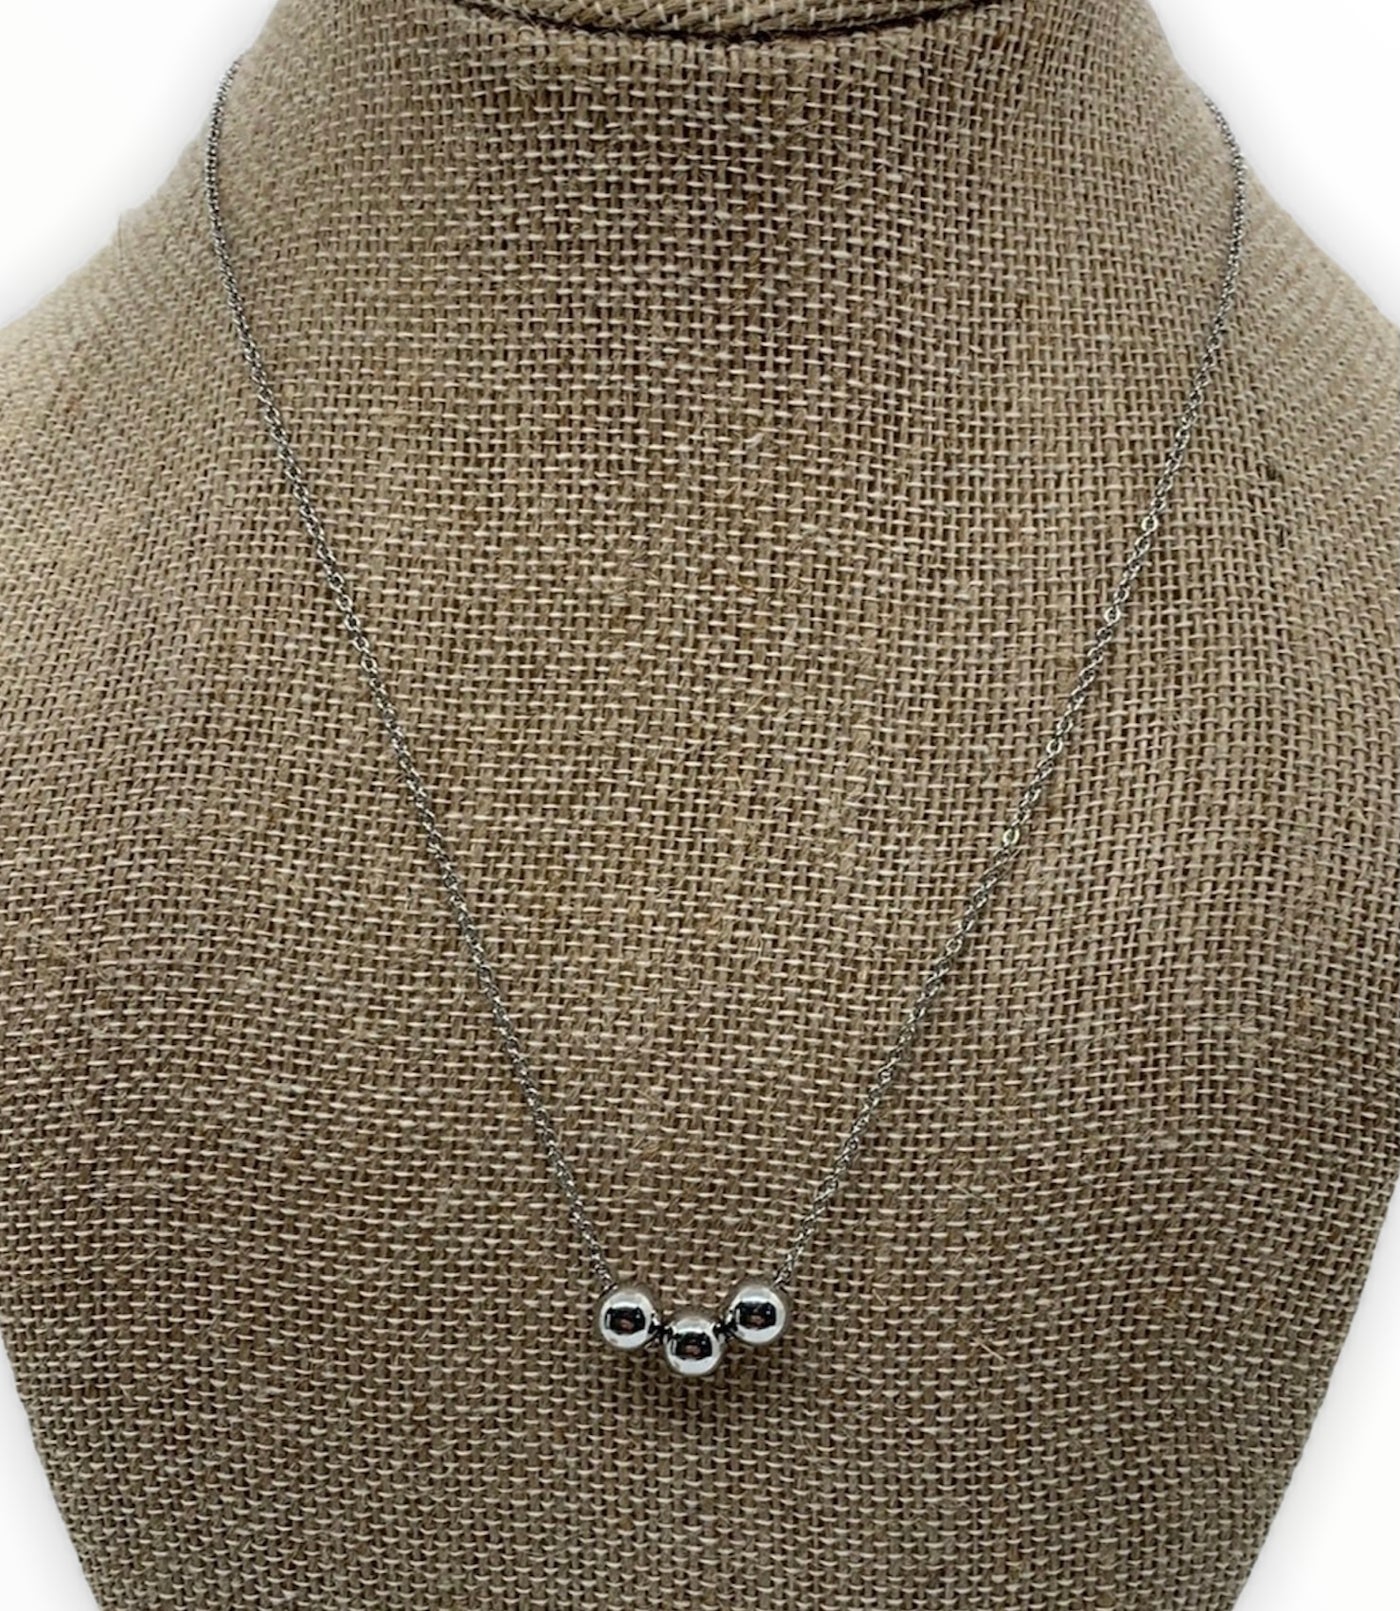 Chain Necklace with Metal Beads - Little Prairie Girl